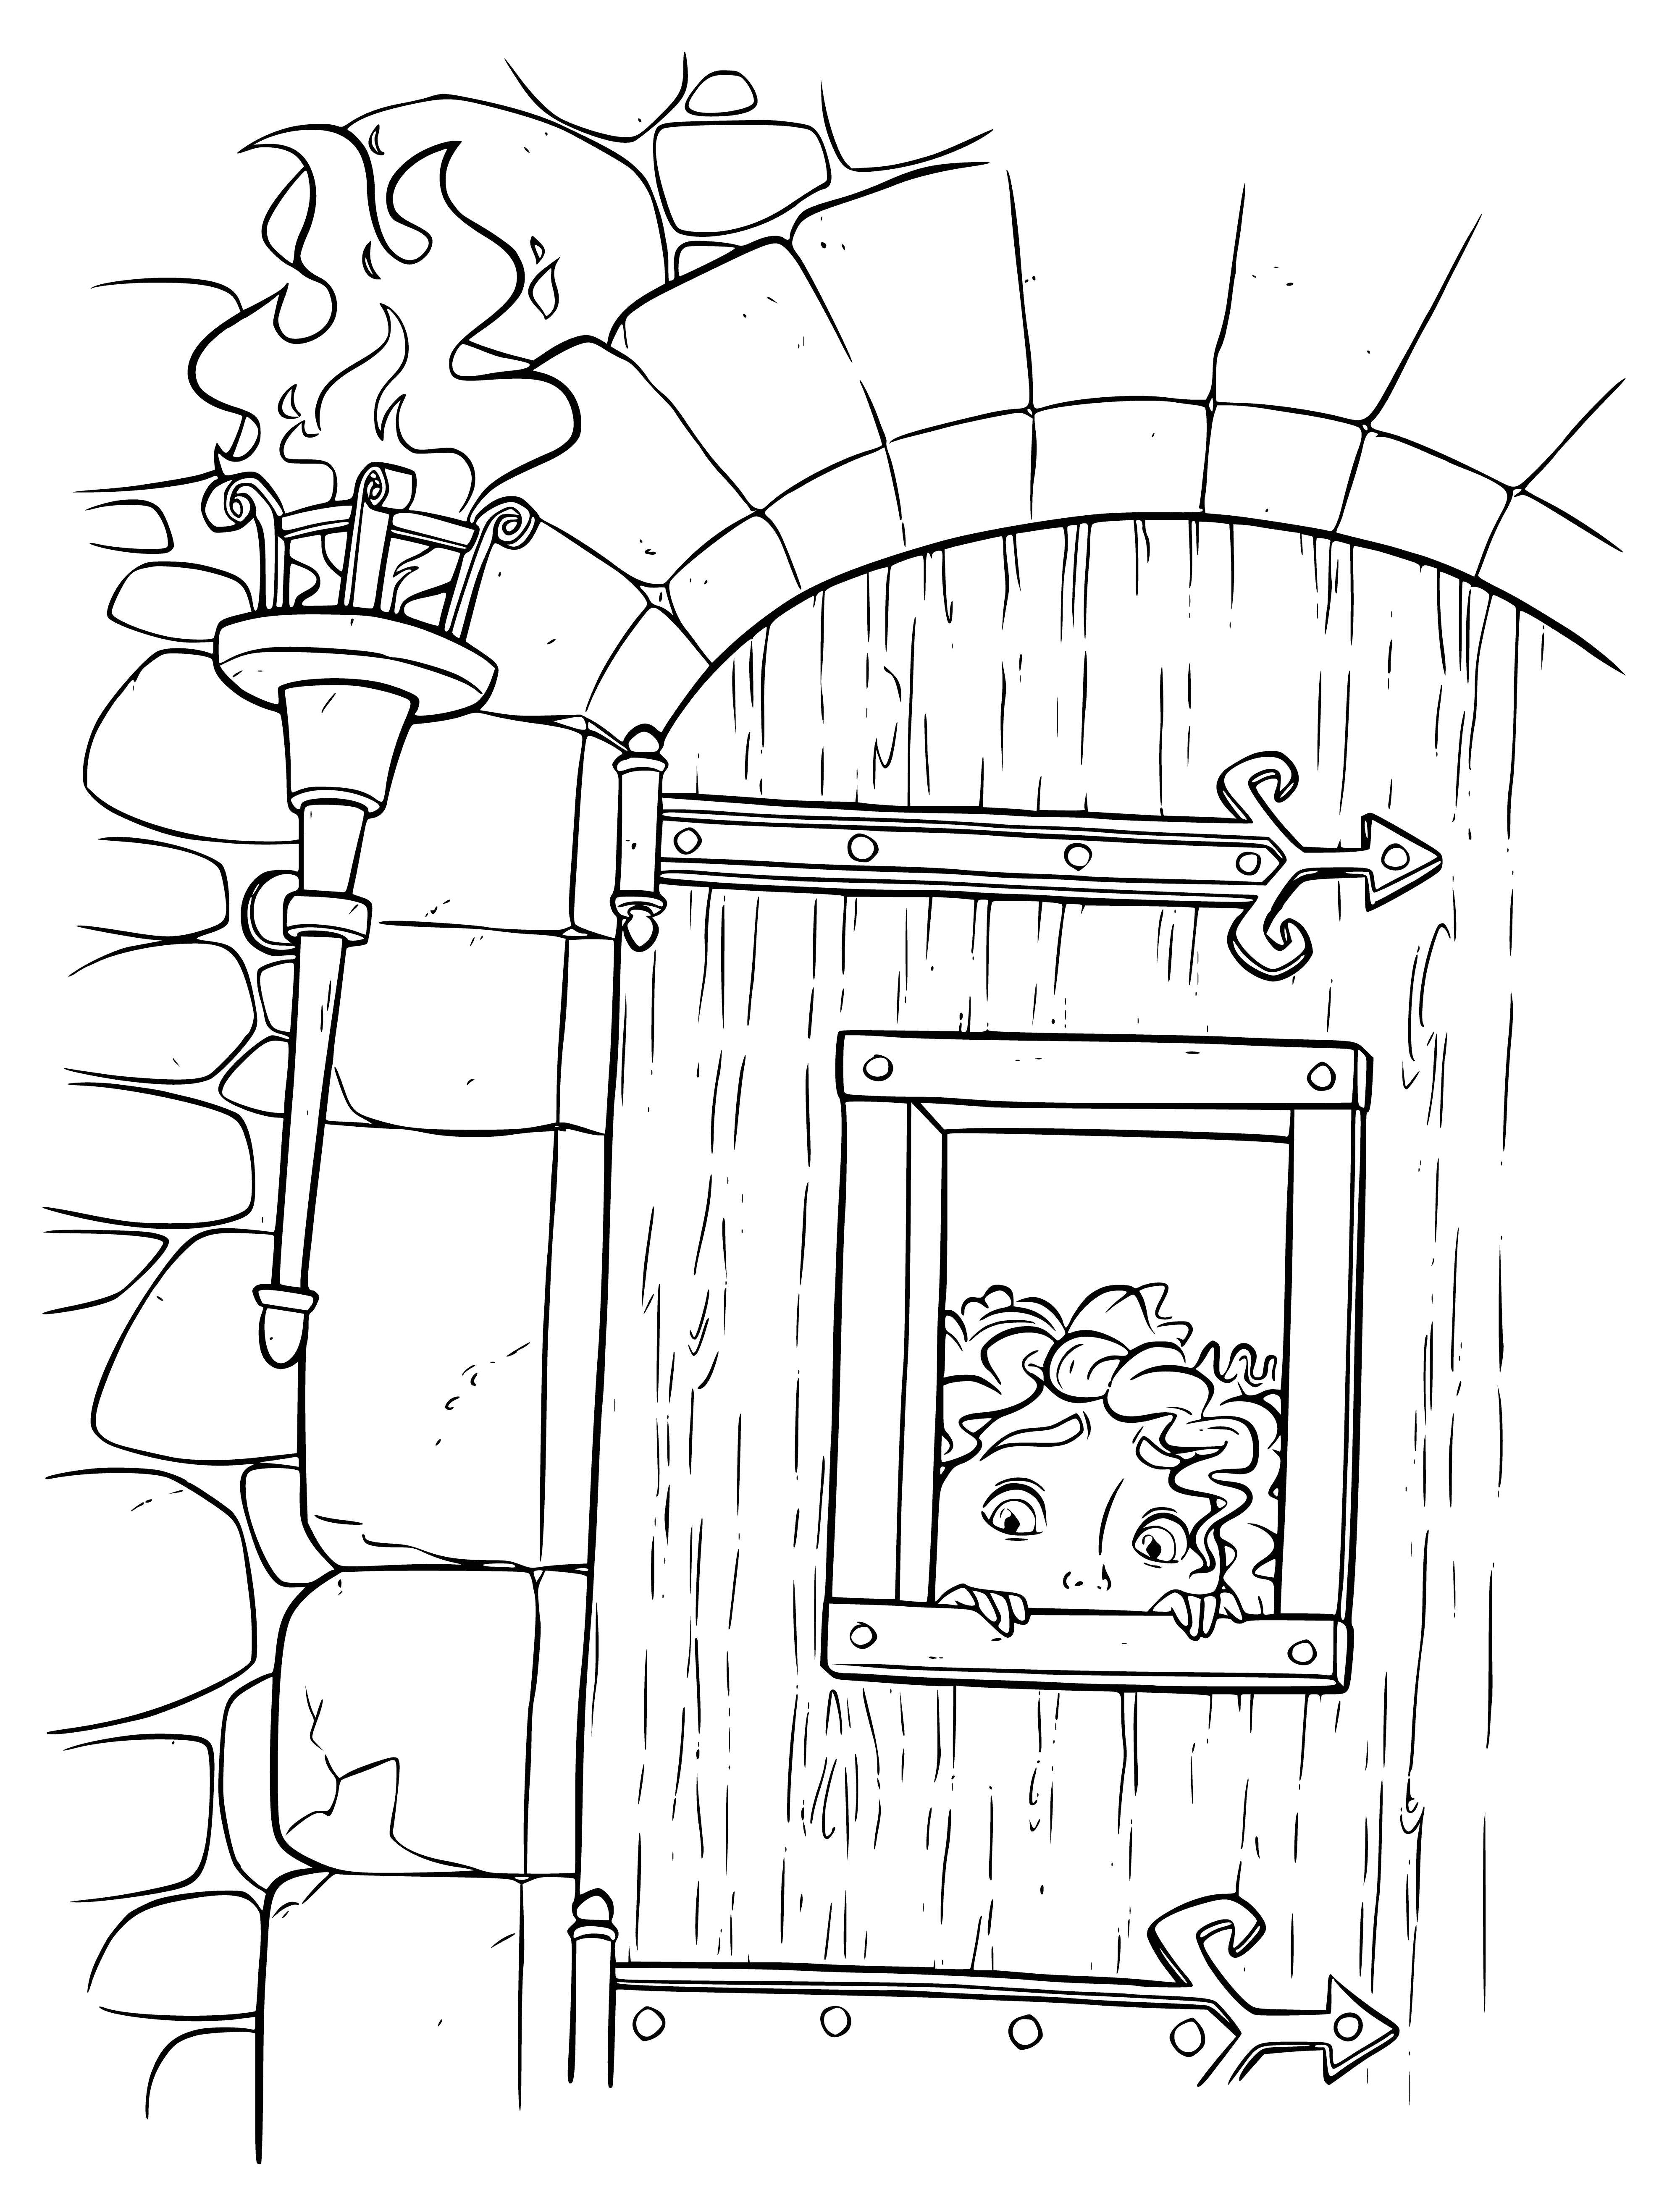 Merida is locked in a room coloring page